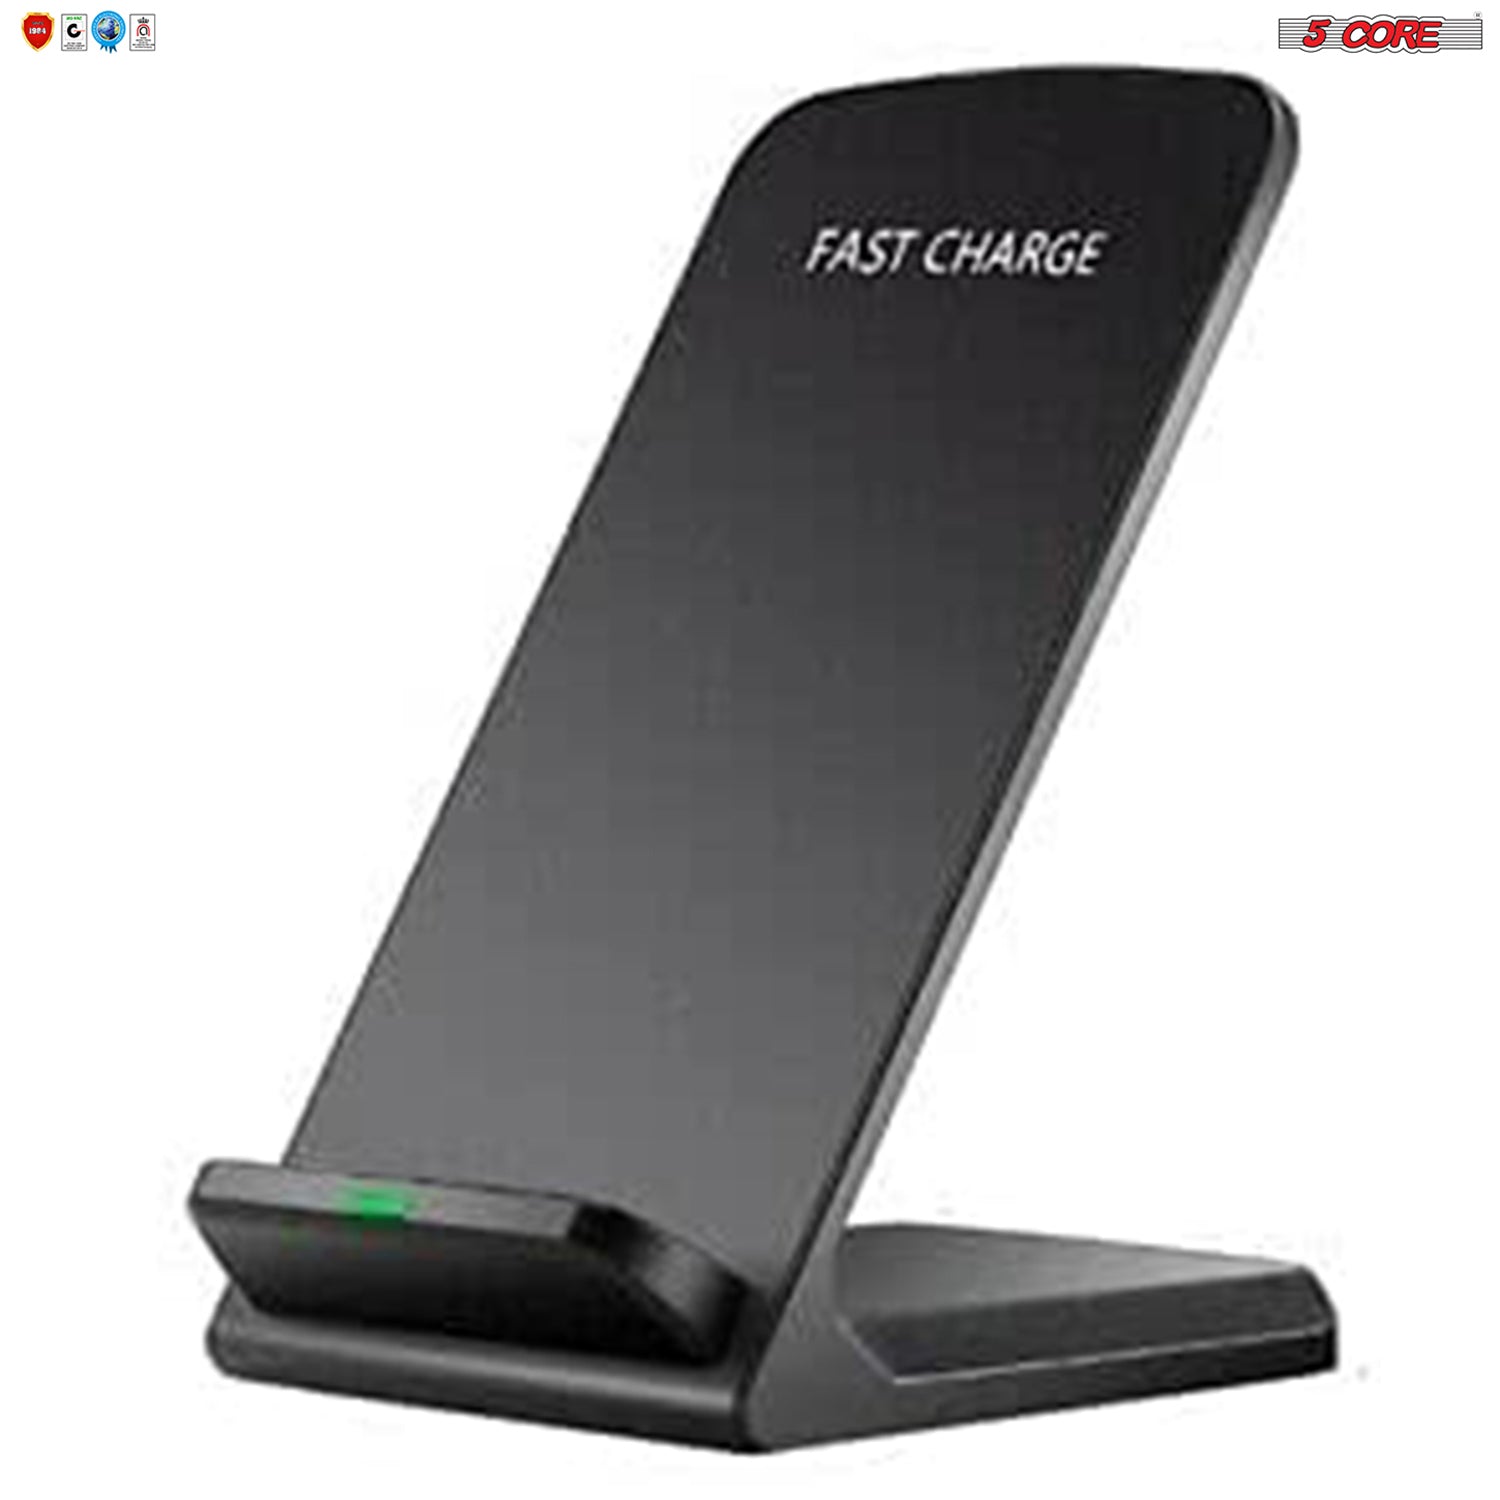 5 Core Wireless Charger, 10W Max Wireless Charging Stand, Qi Wireless Charging Stand Compatible with All Smart Phones